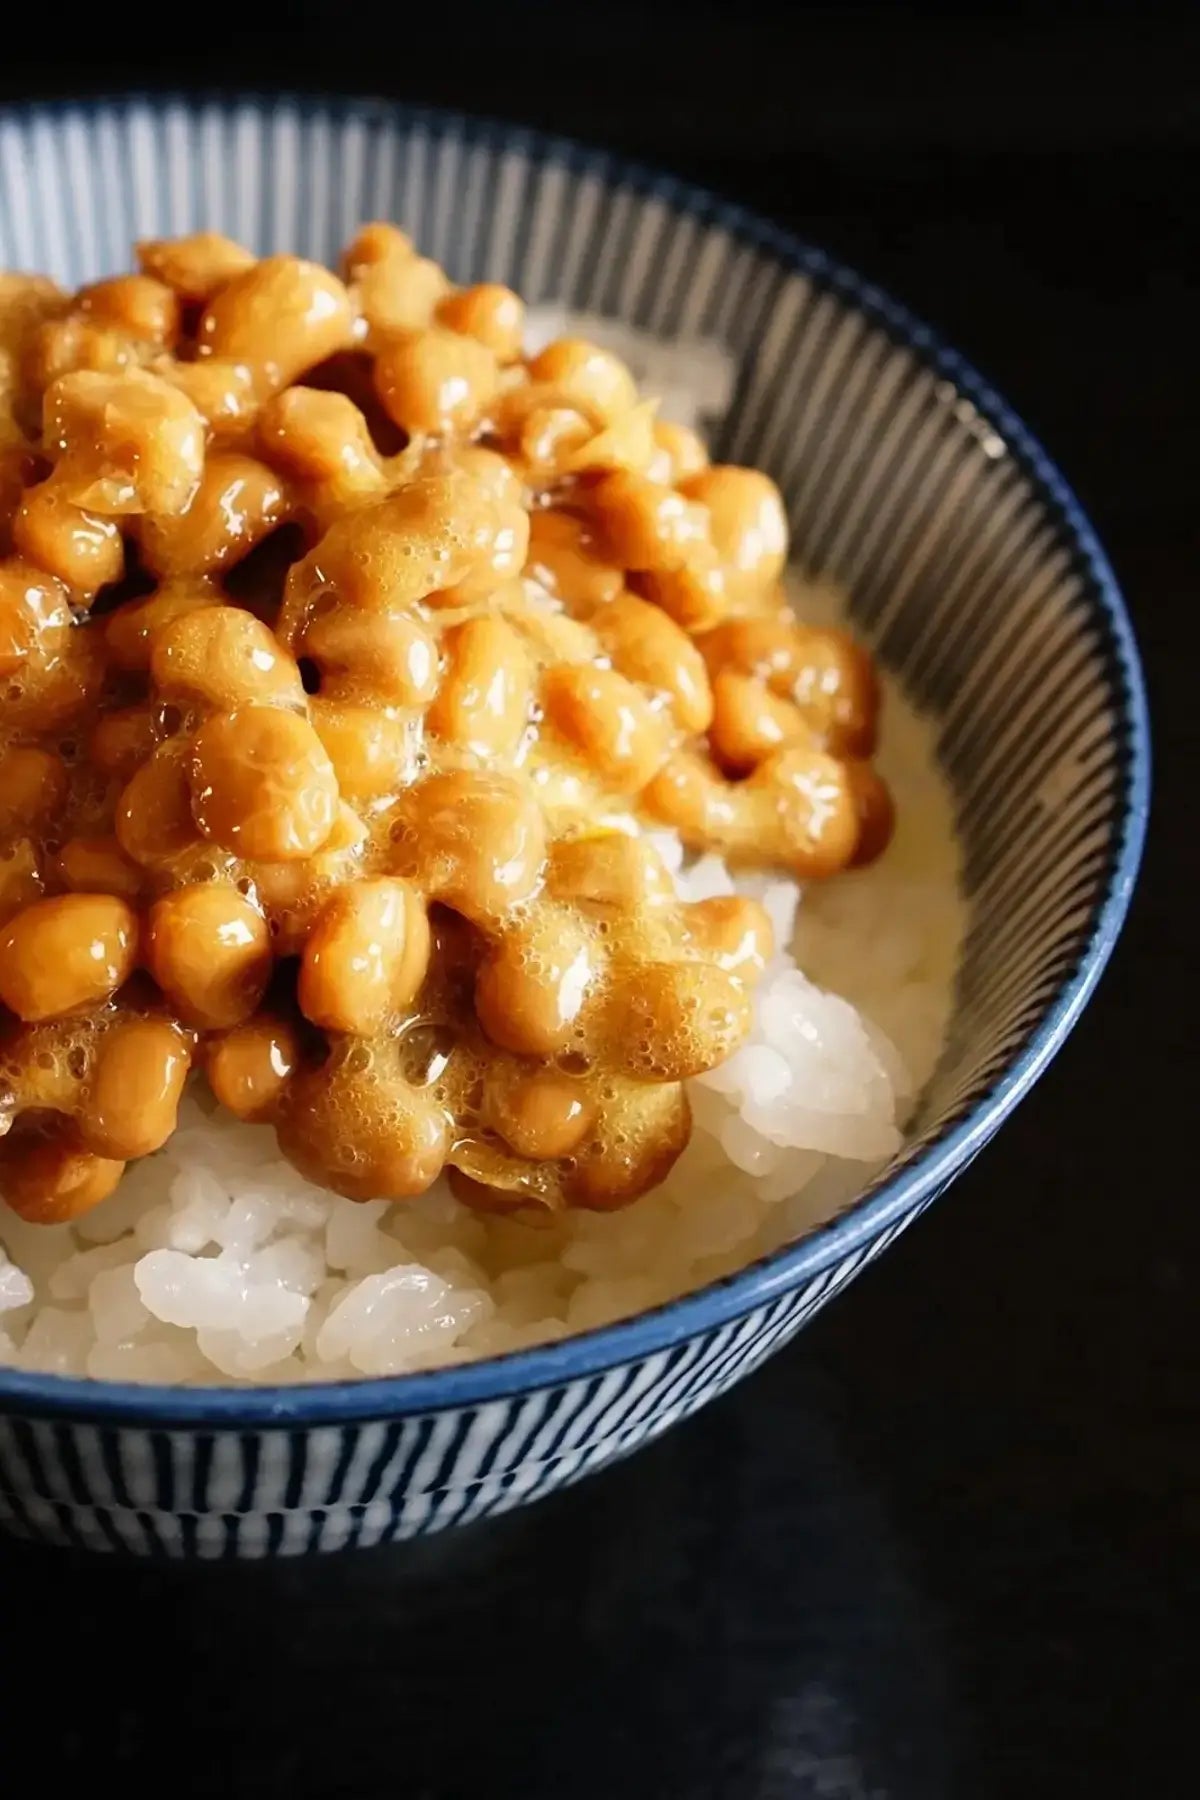 Natto Gohan (Natto with Rice) pictured in a lovely bowl. This Japanese breakfast can be eaten in many easy variations and comes together in less than 5 minutes.